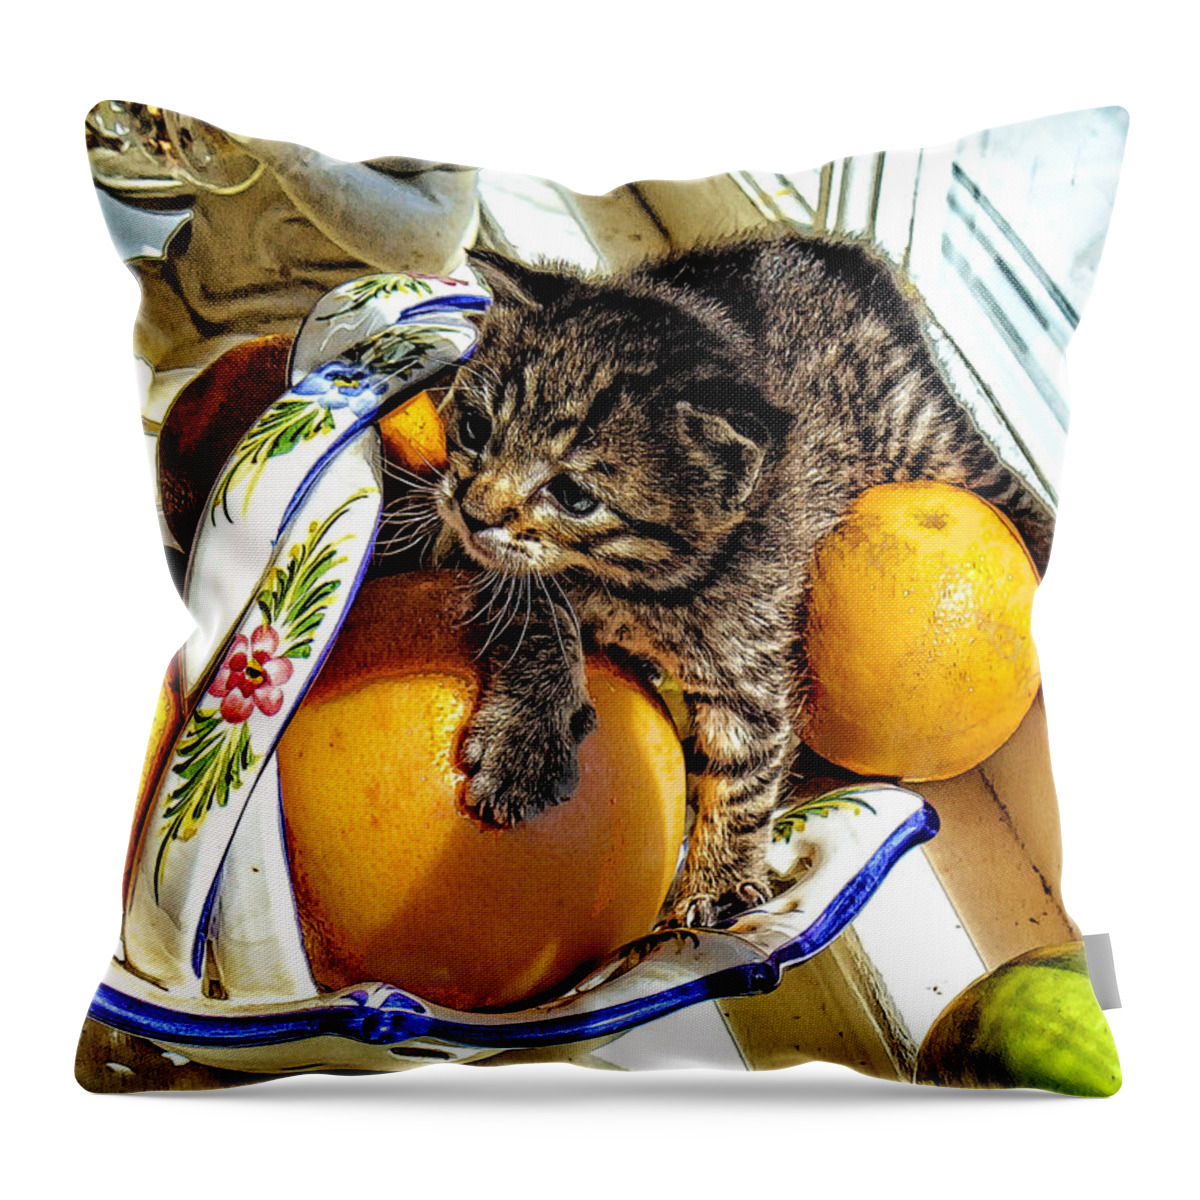 Kitten Throw Pillow featuring the photograph Fruit Bowl Kitten by Constantine Gregory